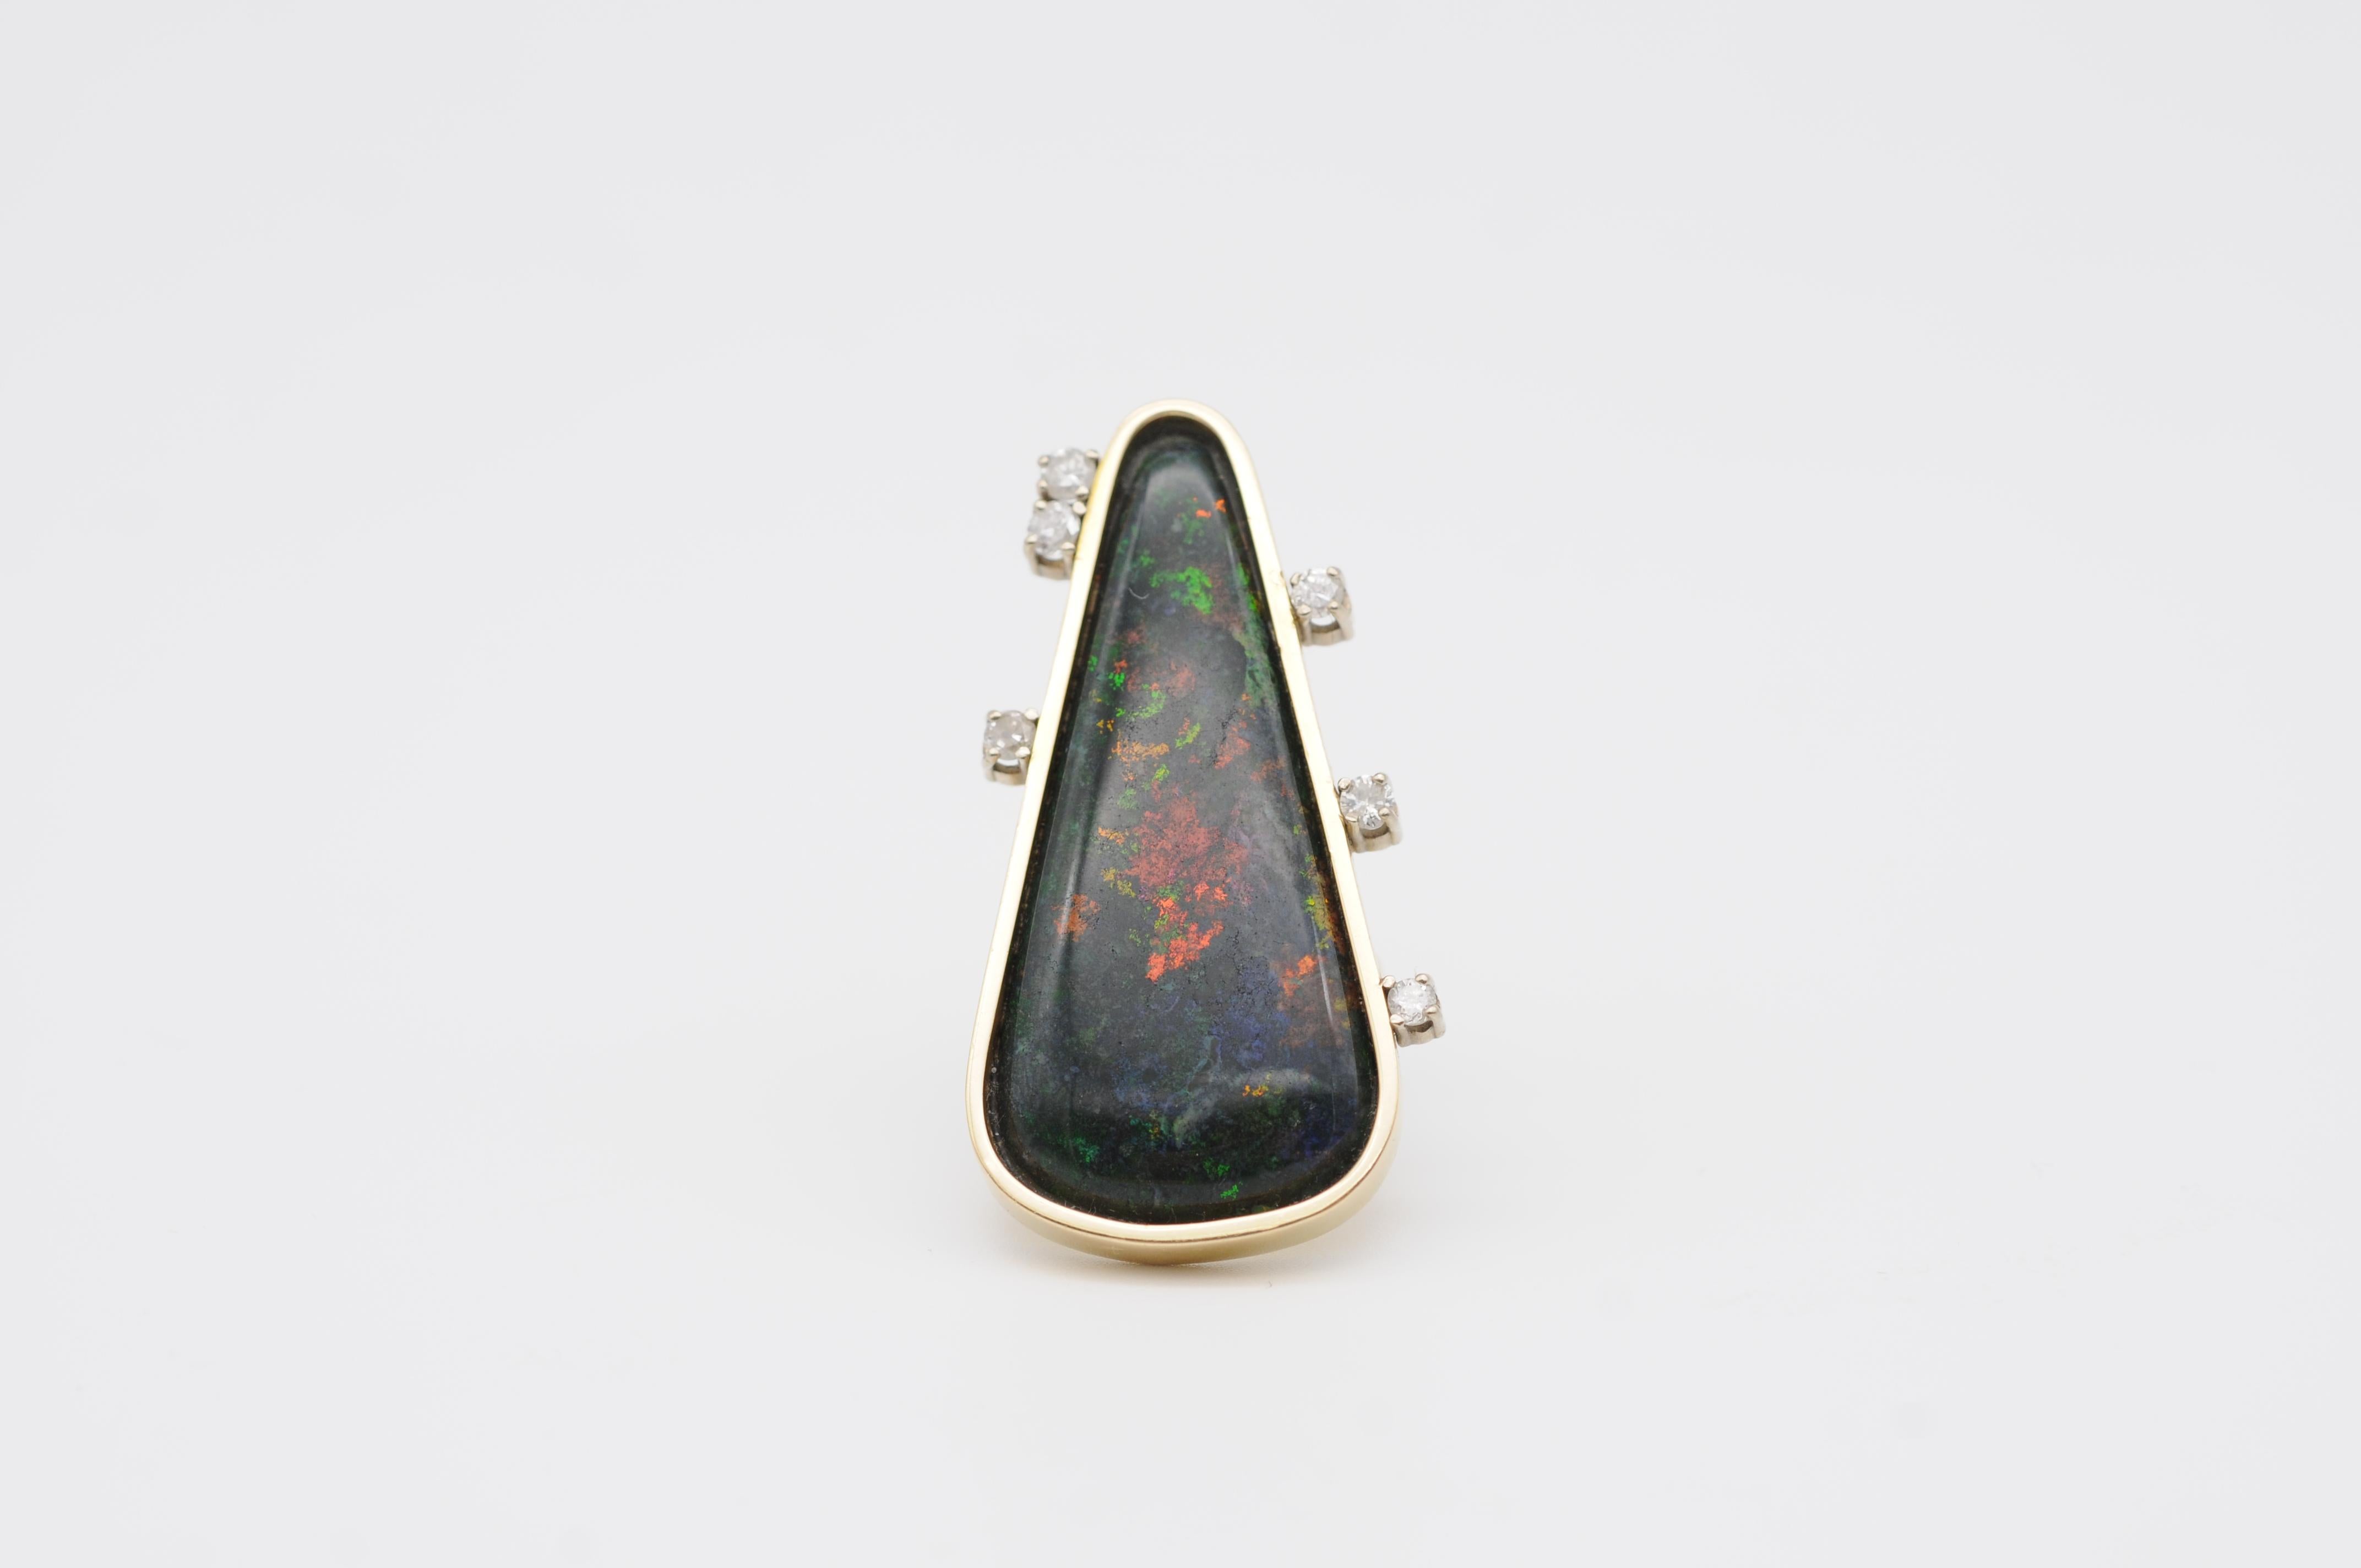 Indulge in the extraordinary beauty and sophistication of the Unusual Australian Black Opal Ring with Brilliants - a one-of-a-kind piece that captures the essence of luxury and elegance. This stunning ring features a large Australian black opal that